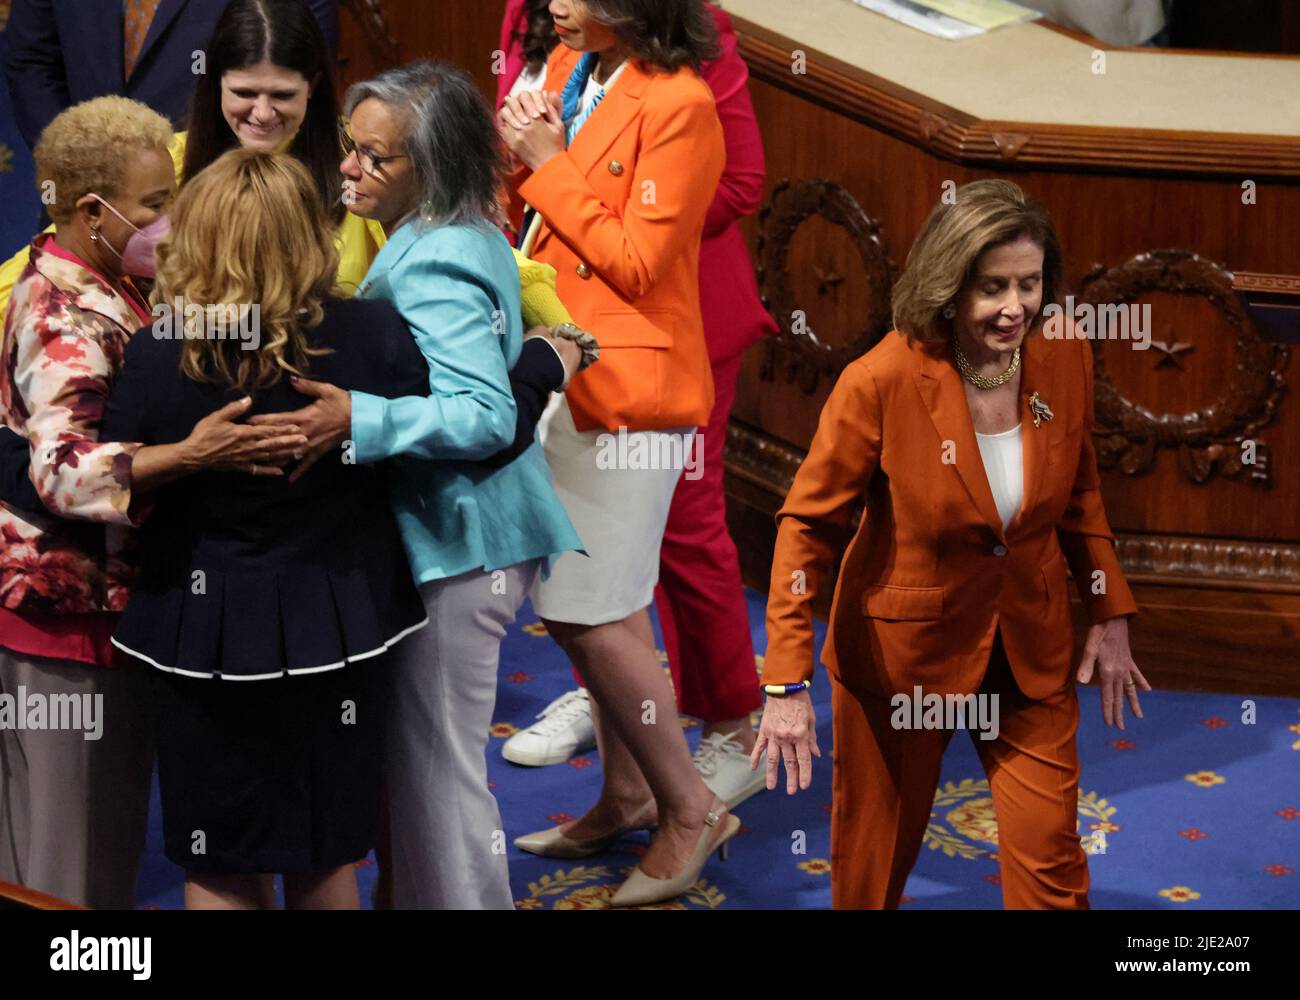 U.S. Speaker of the House Nancy Pelosi (D-CA) celebrates along with U.S. House of Representatives Democrats after passing of the 'Bipartisan Safer Communities Act' gun safety legislation already passed by the U.S. Senate during a final vote in the House Chamber on Capitol Hill in Washington, June 24, 2022.  REUTERS/Jim Bourg Stock Photo